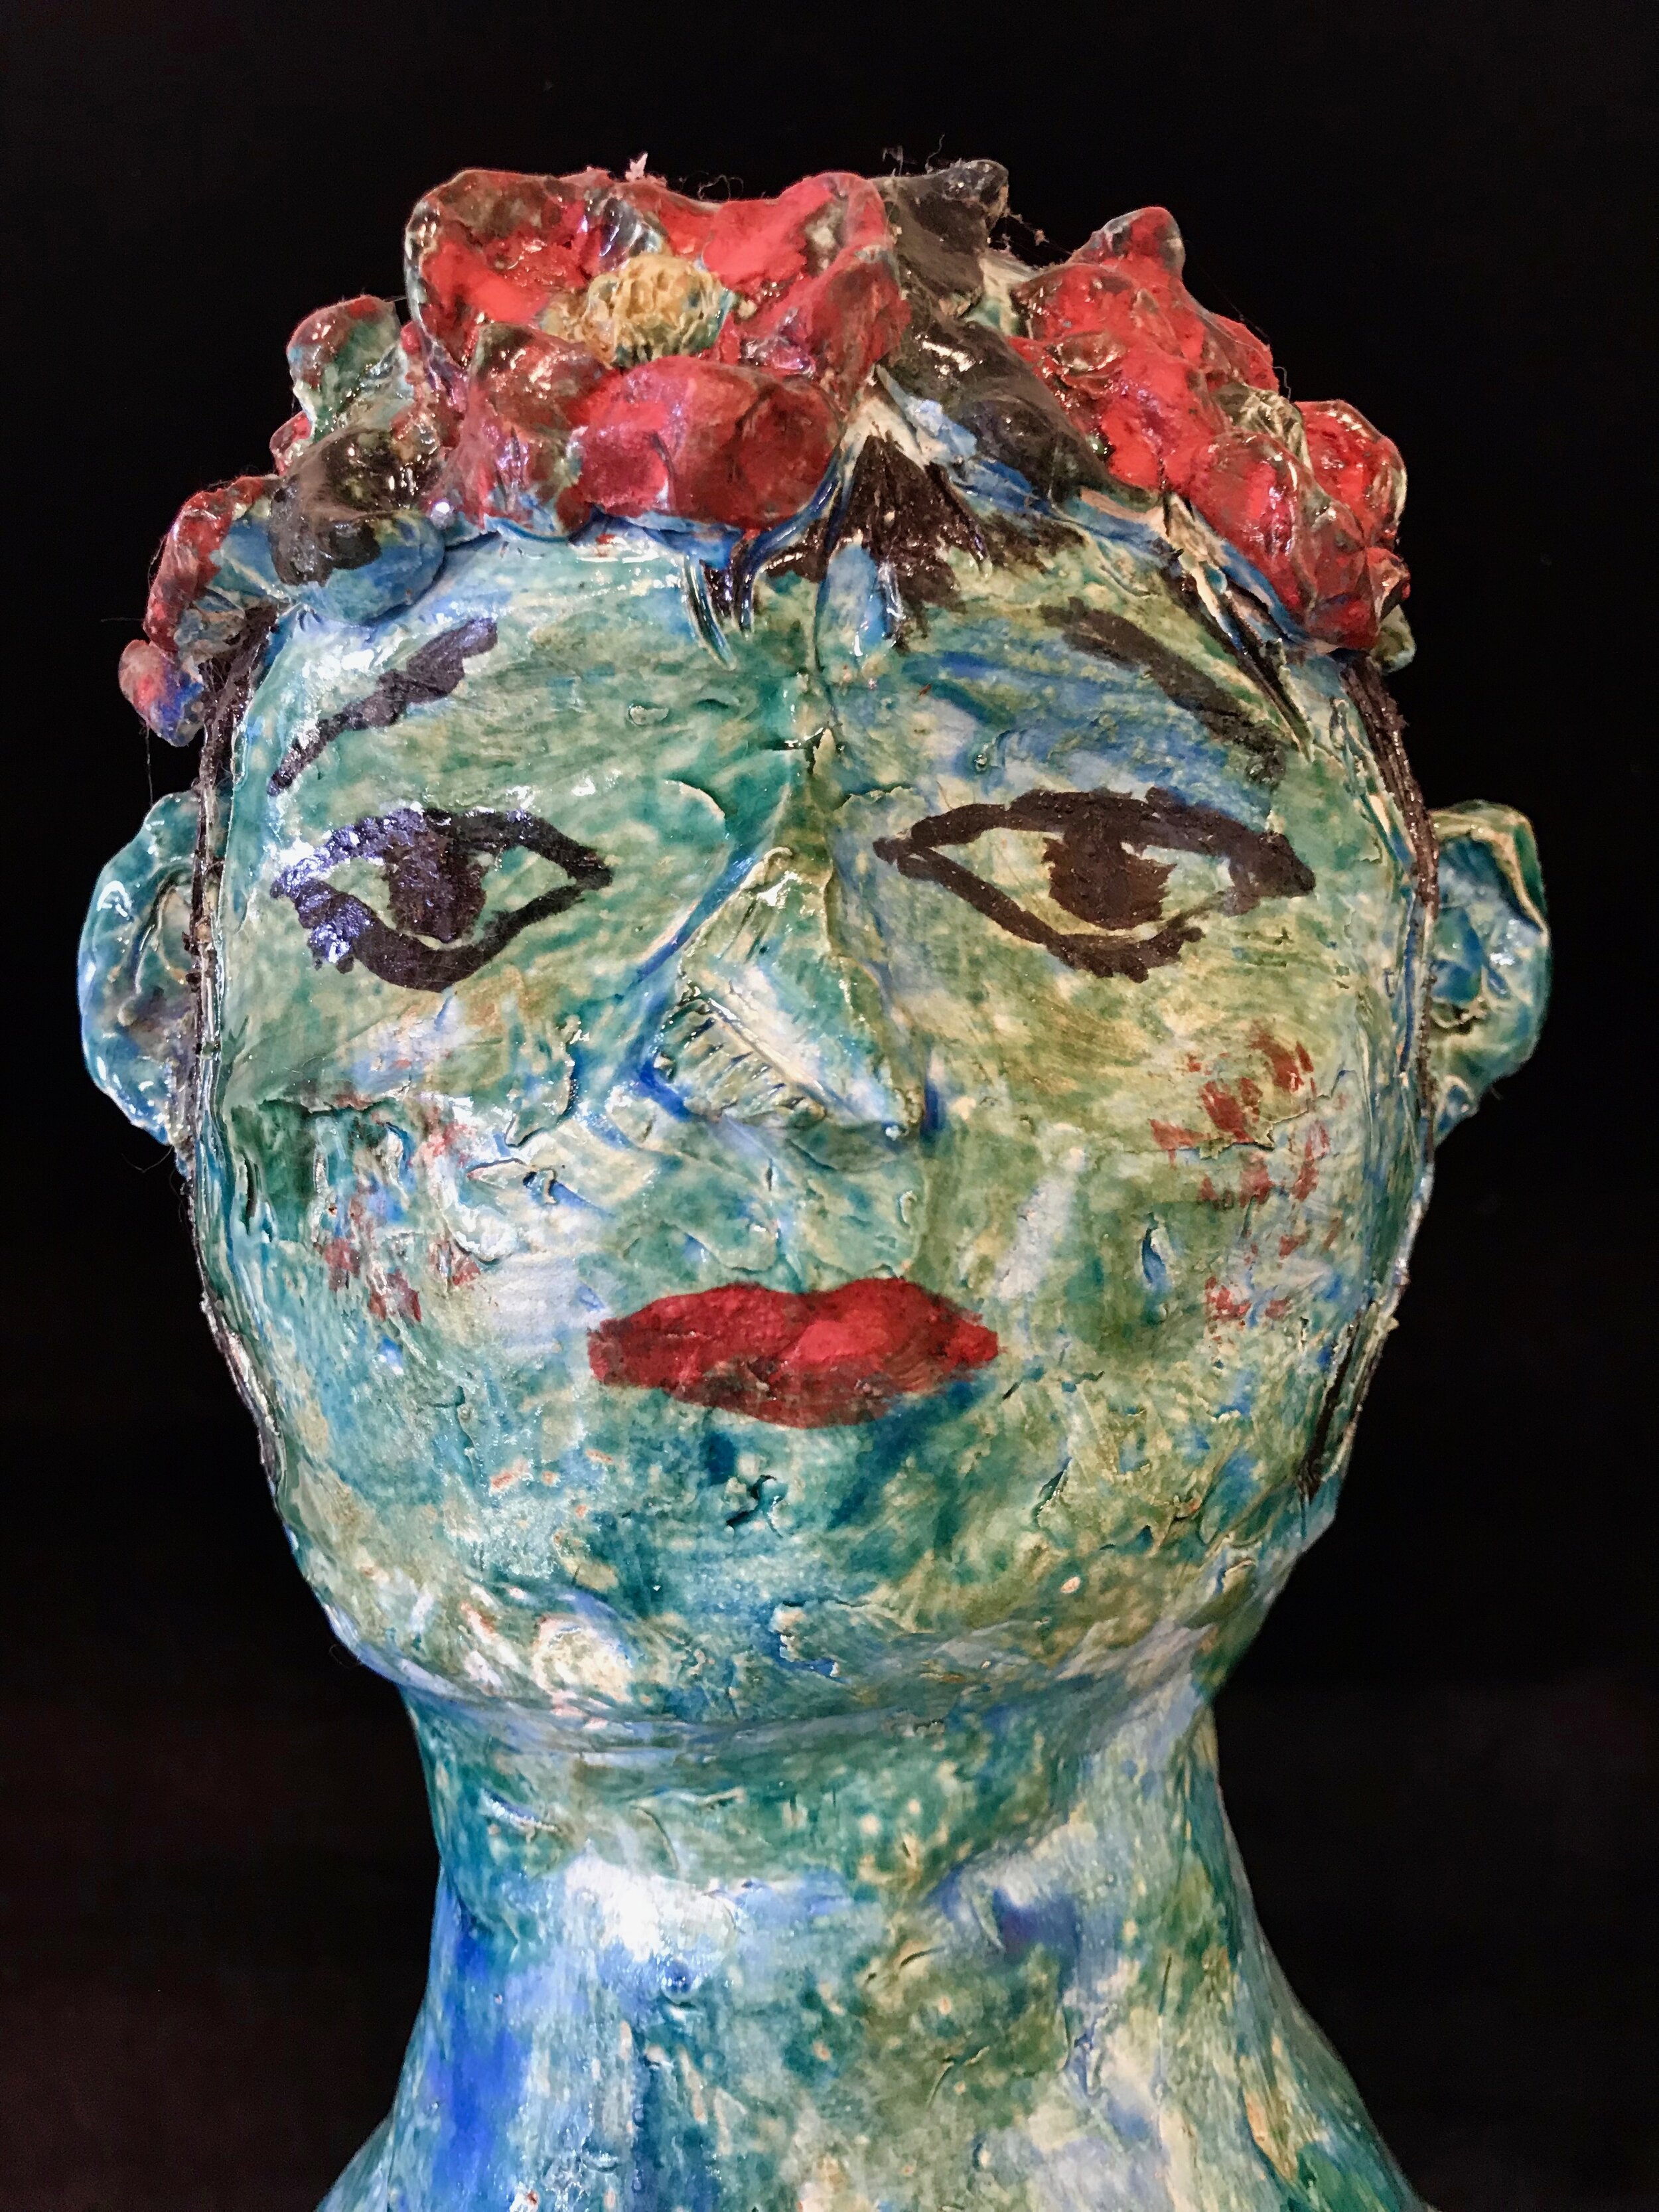 "Boy With Flower Crown" (Detail)